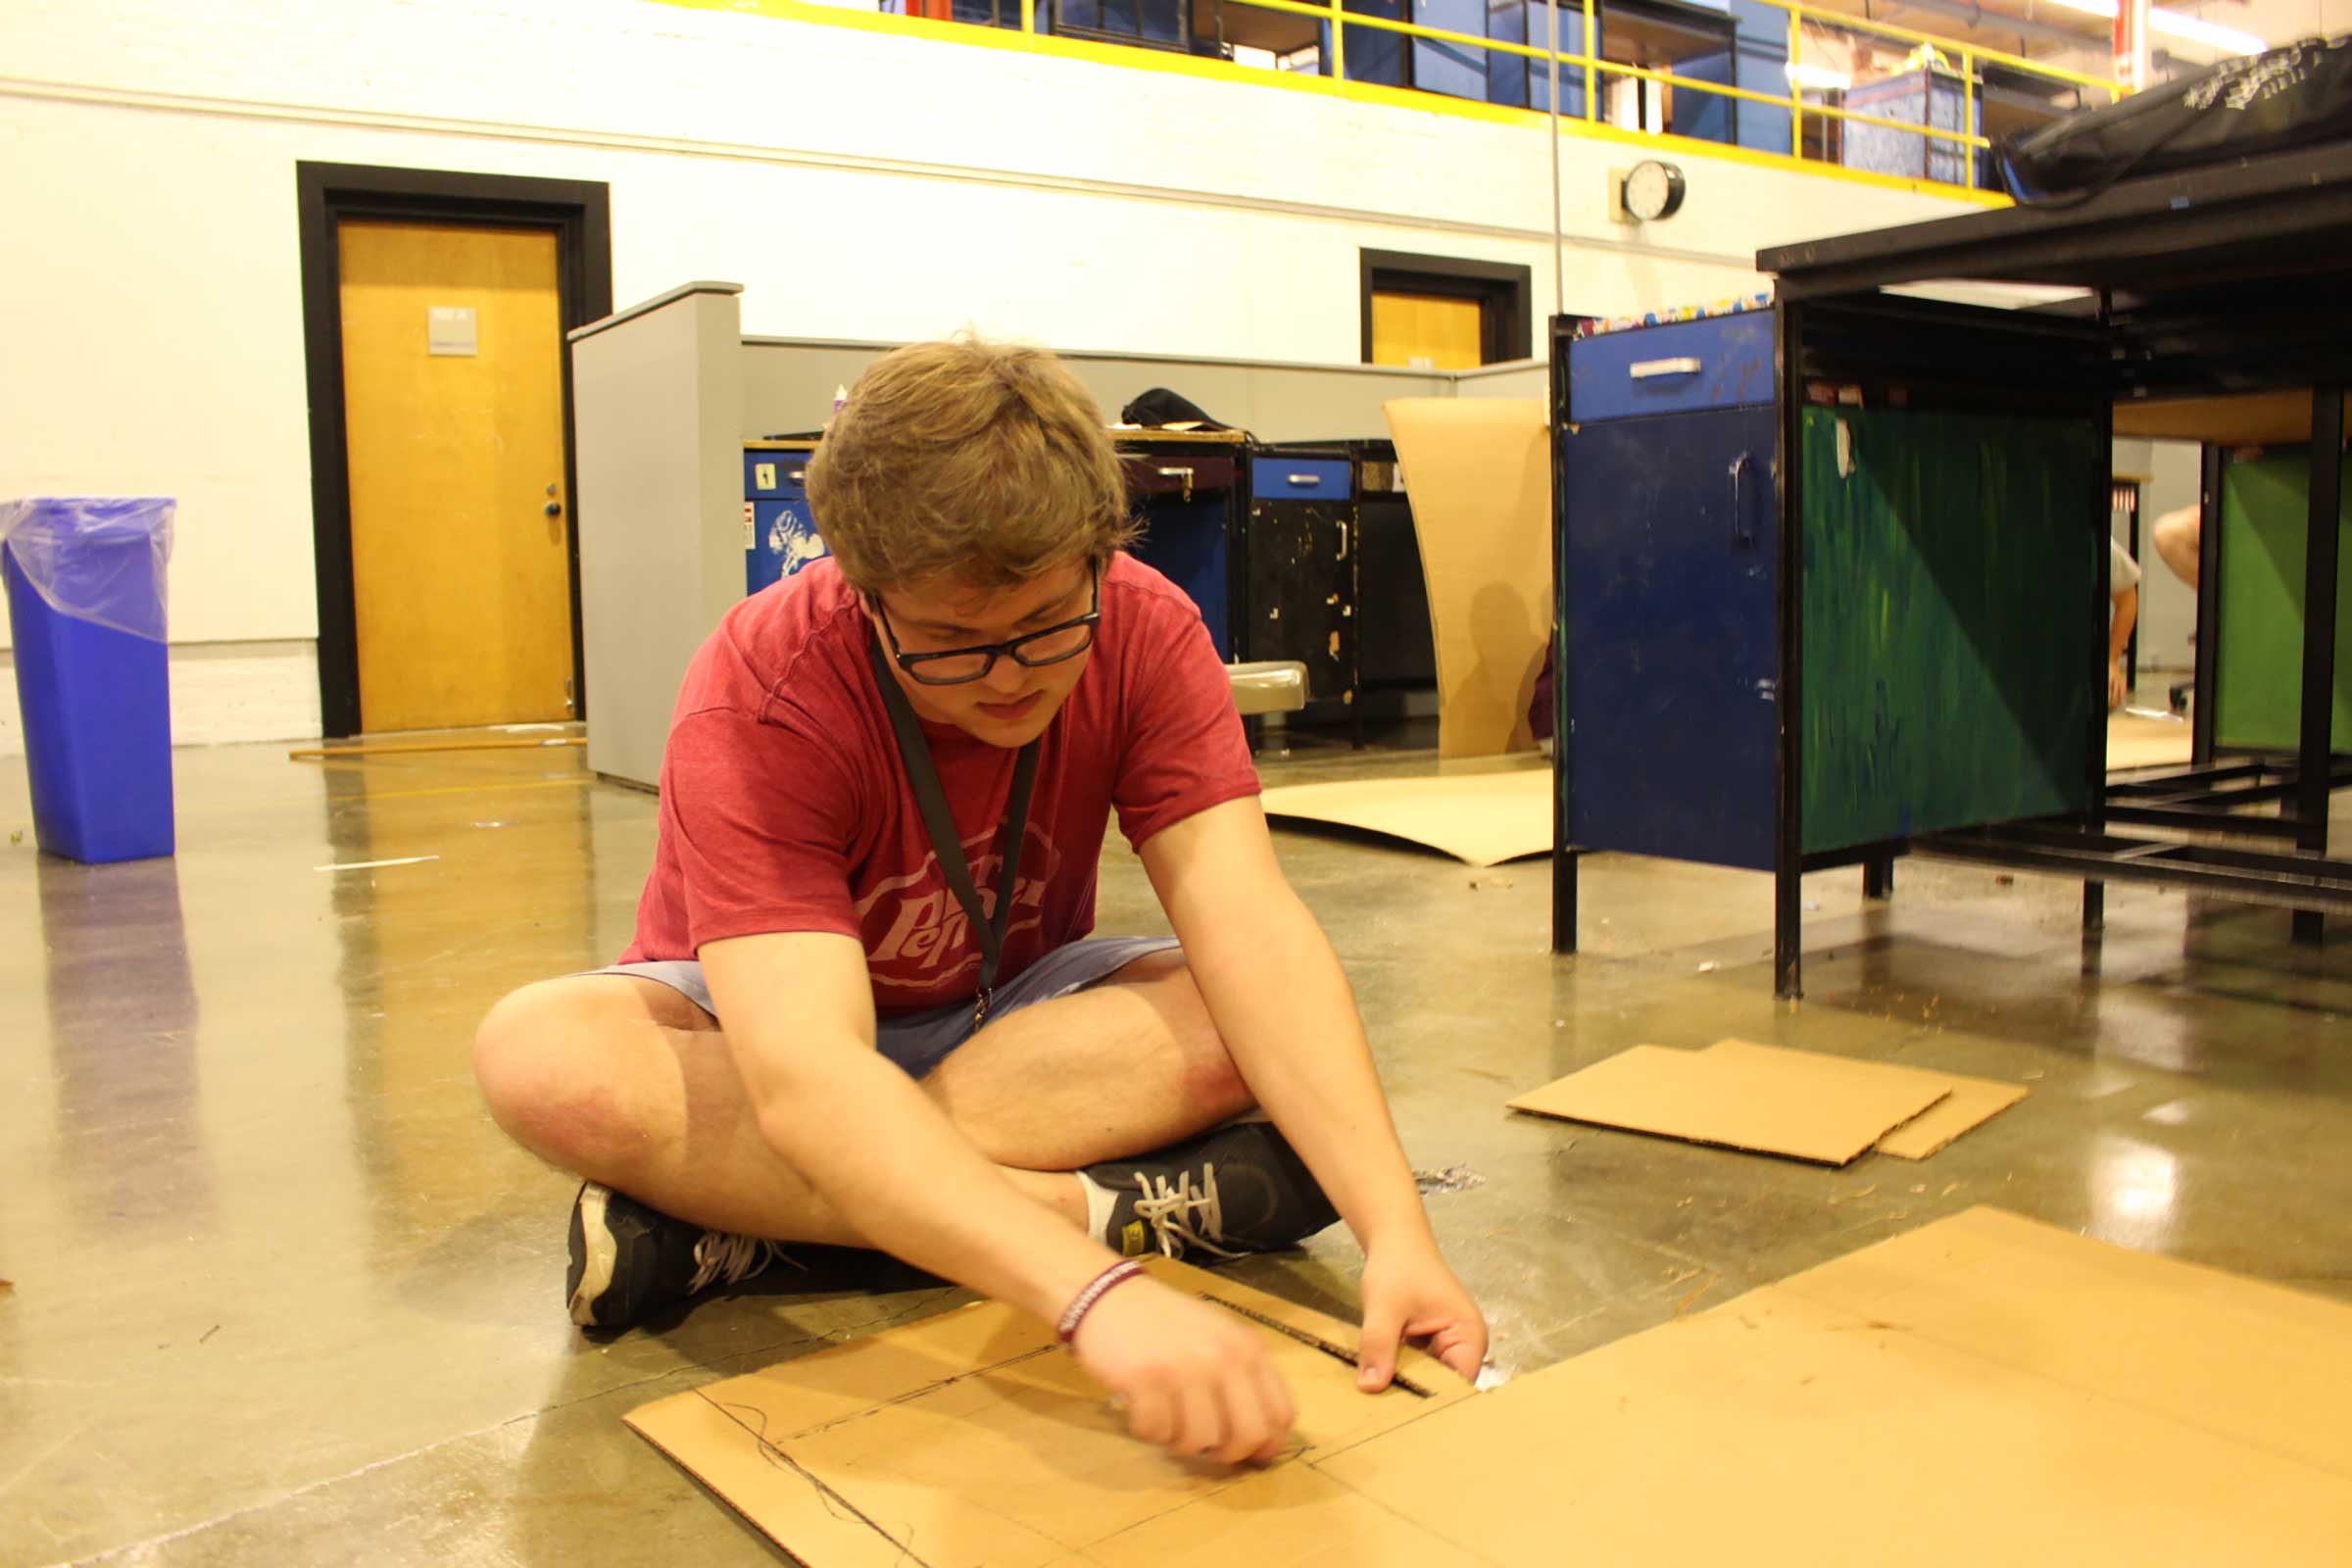 Day 4: Cardboard Sitting Device Construction 16